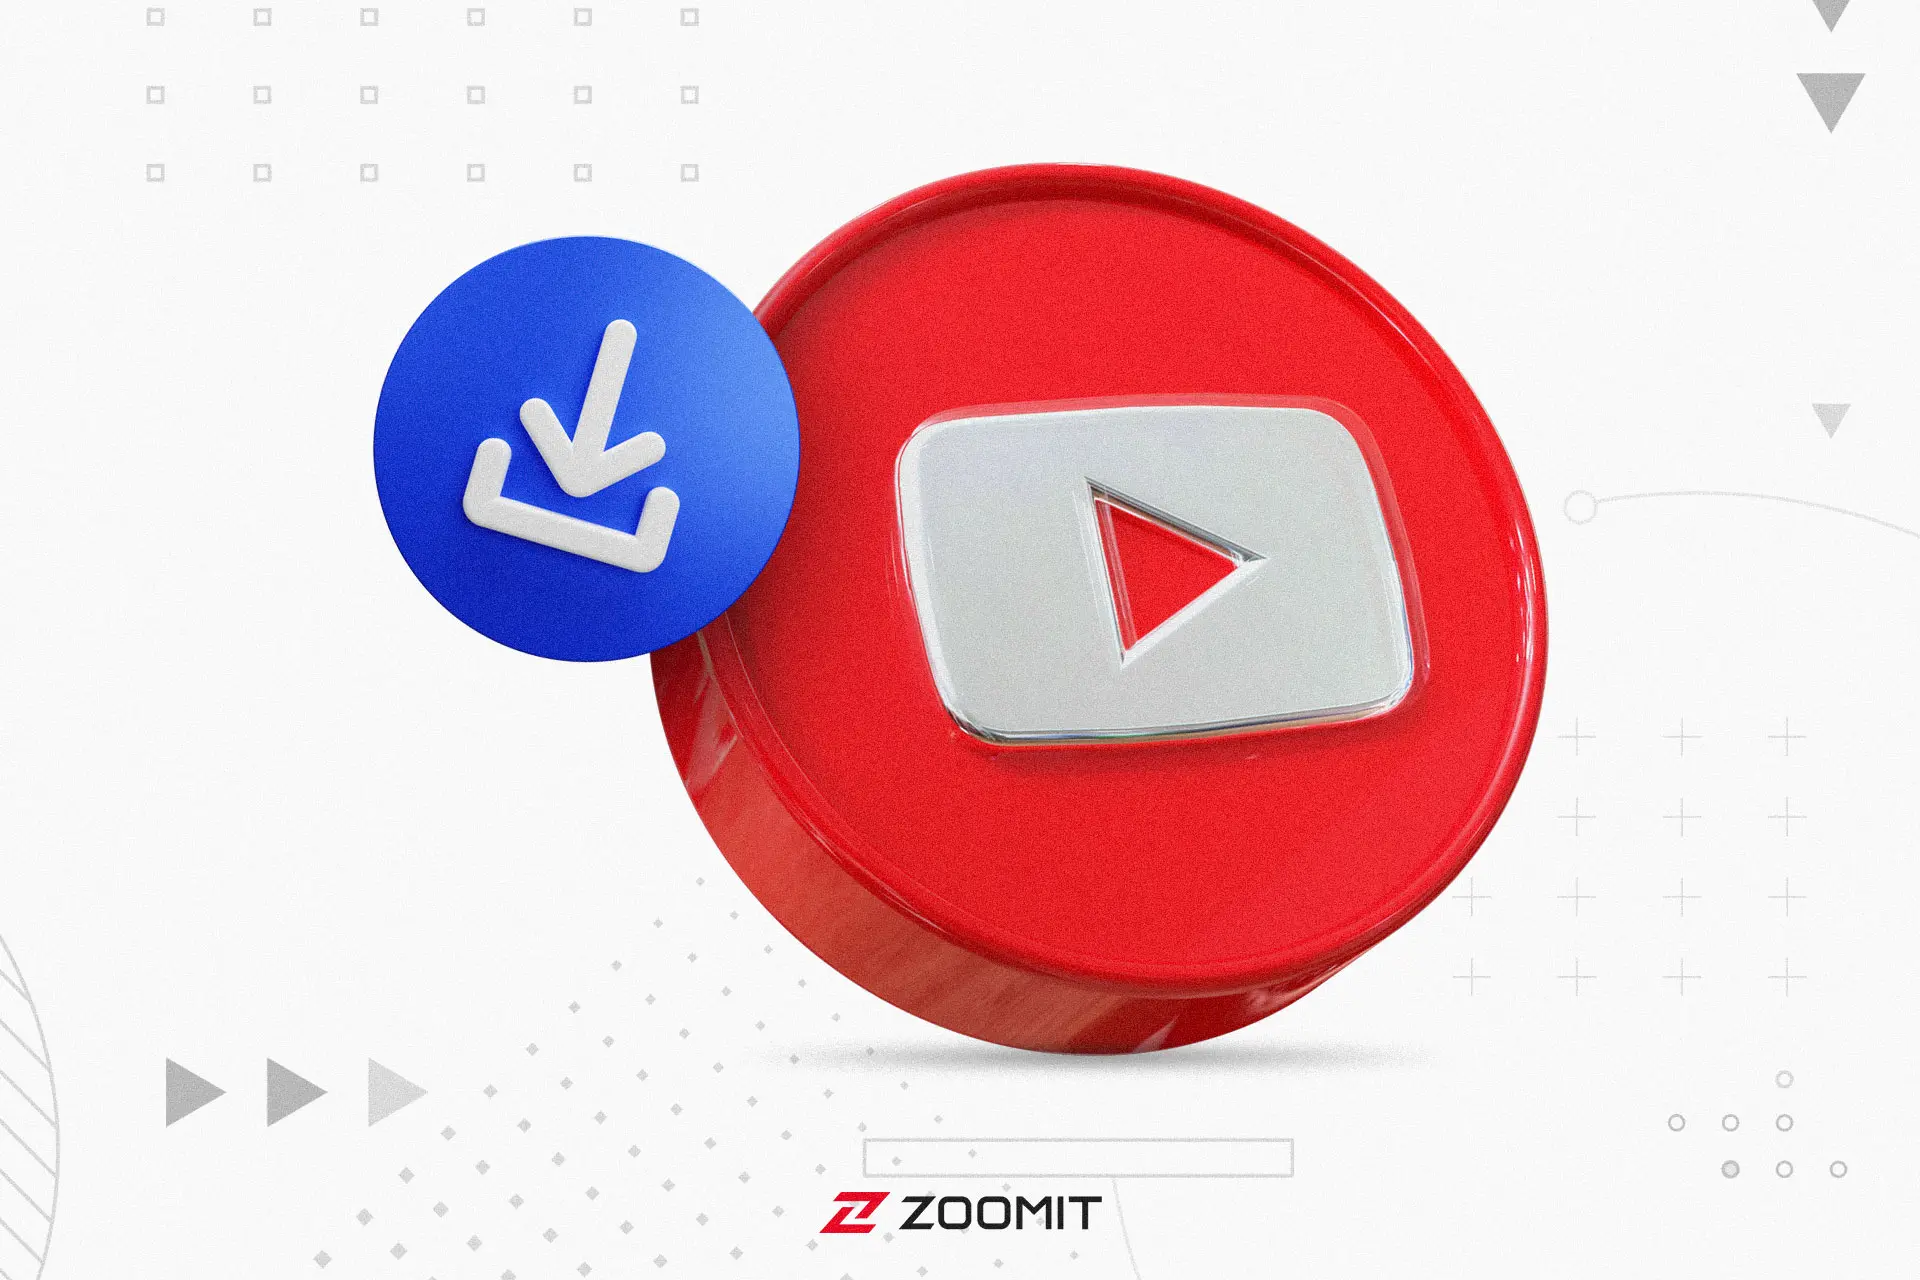 How To Download From YouTube With Android And iPhone Phones, Direct Link And Telegram